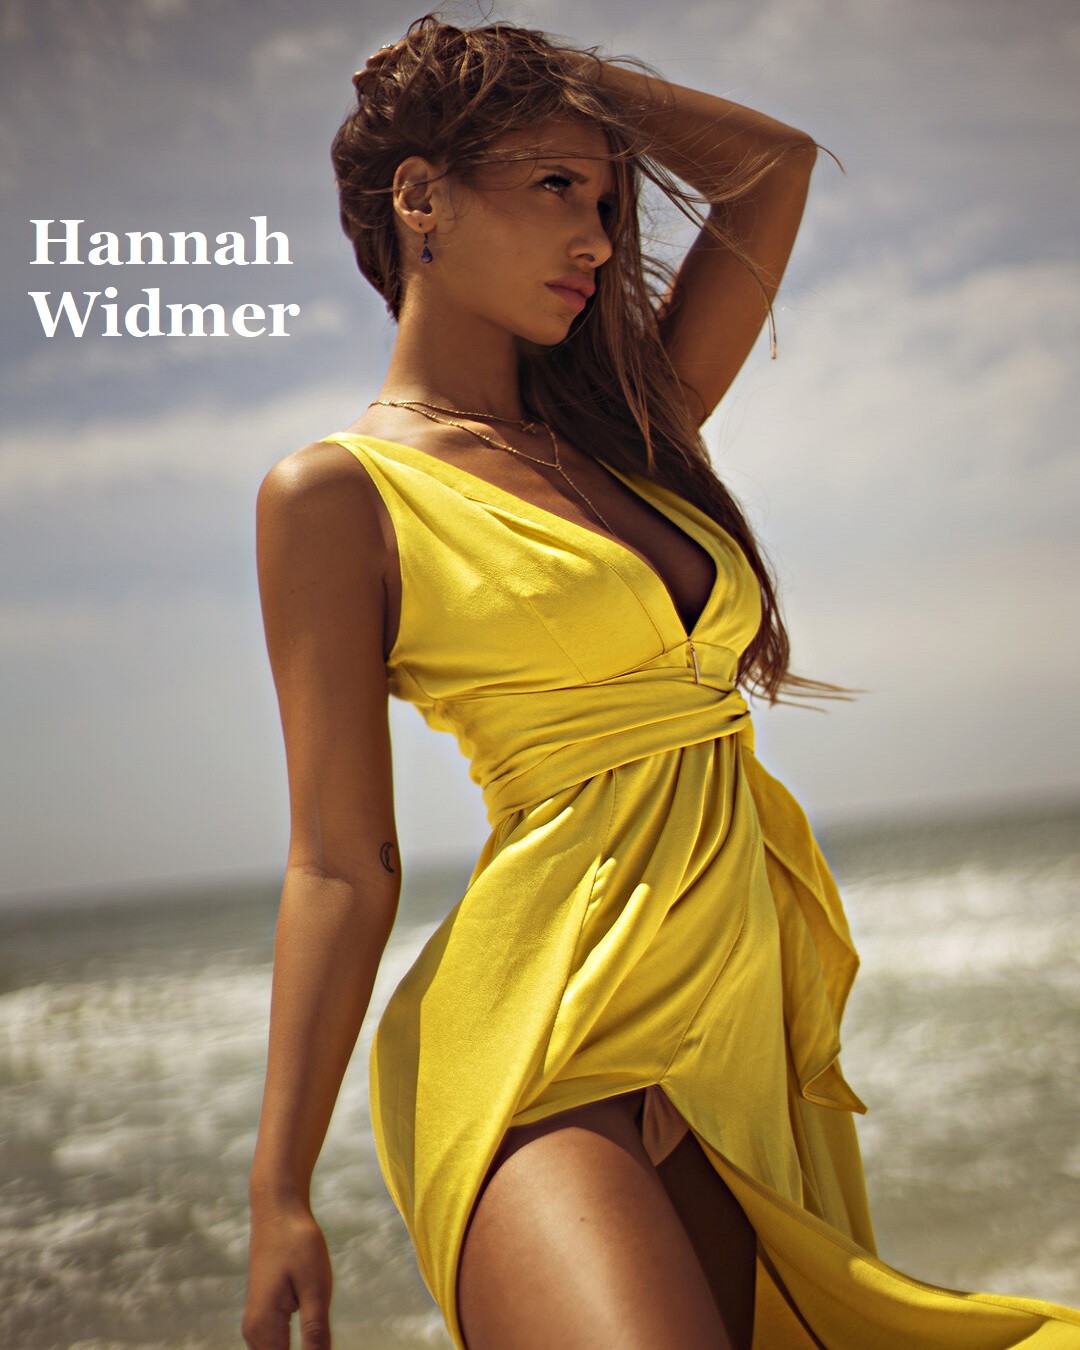 Understanding The Glamour Of The Modeling Industry With Hannah Widmer